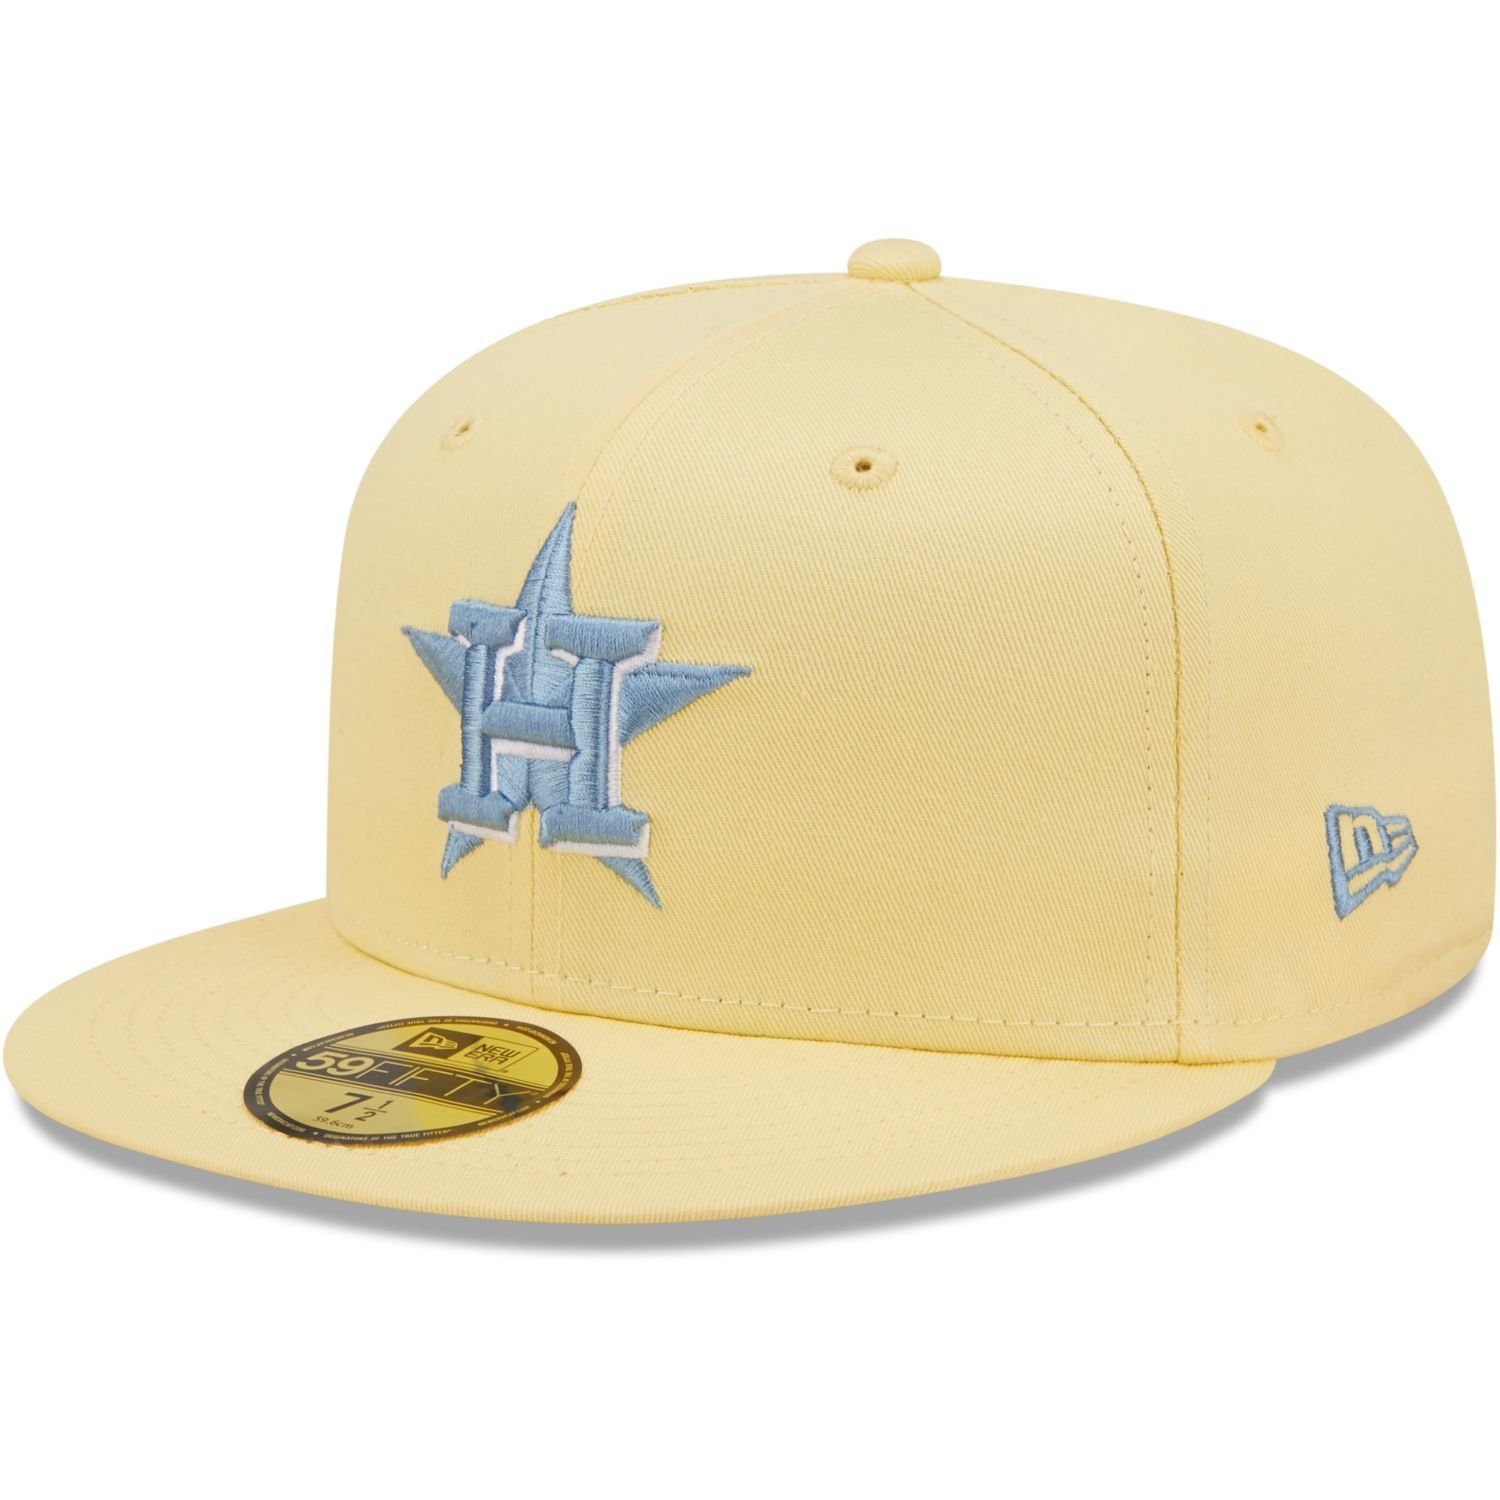 Era Astros Fitted Houston 59Fifty COOPERSTOWN Cap New